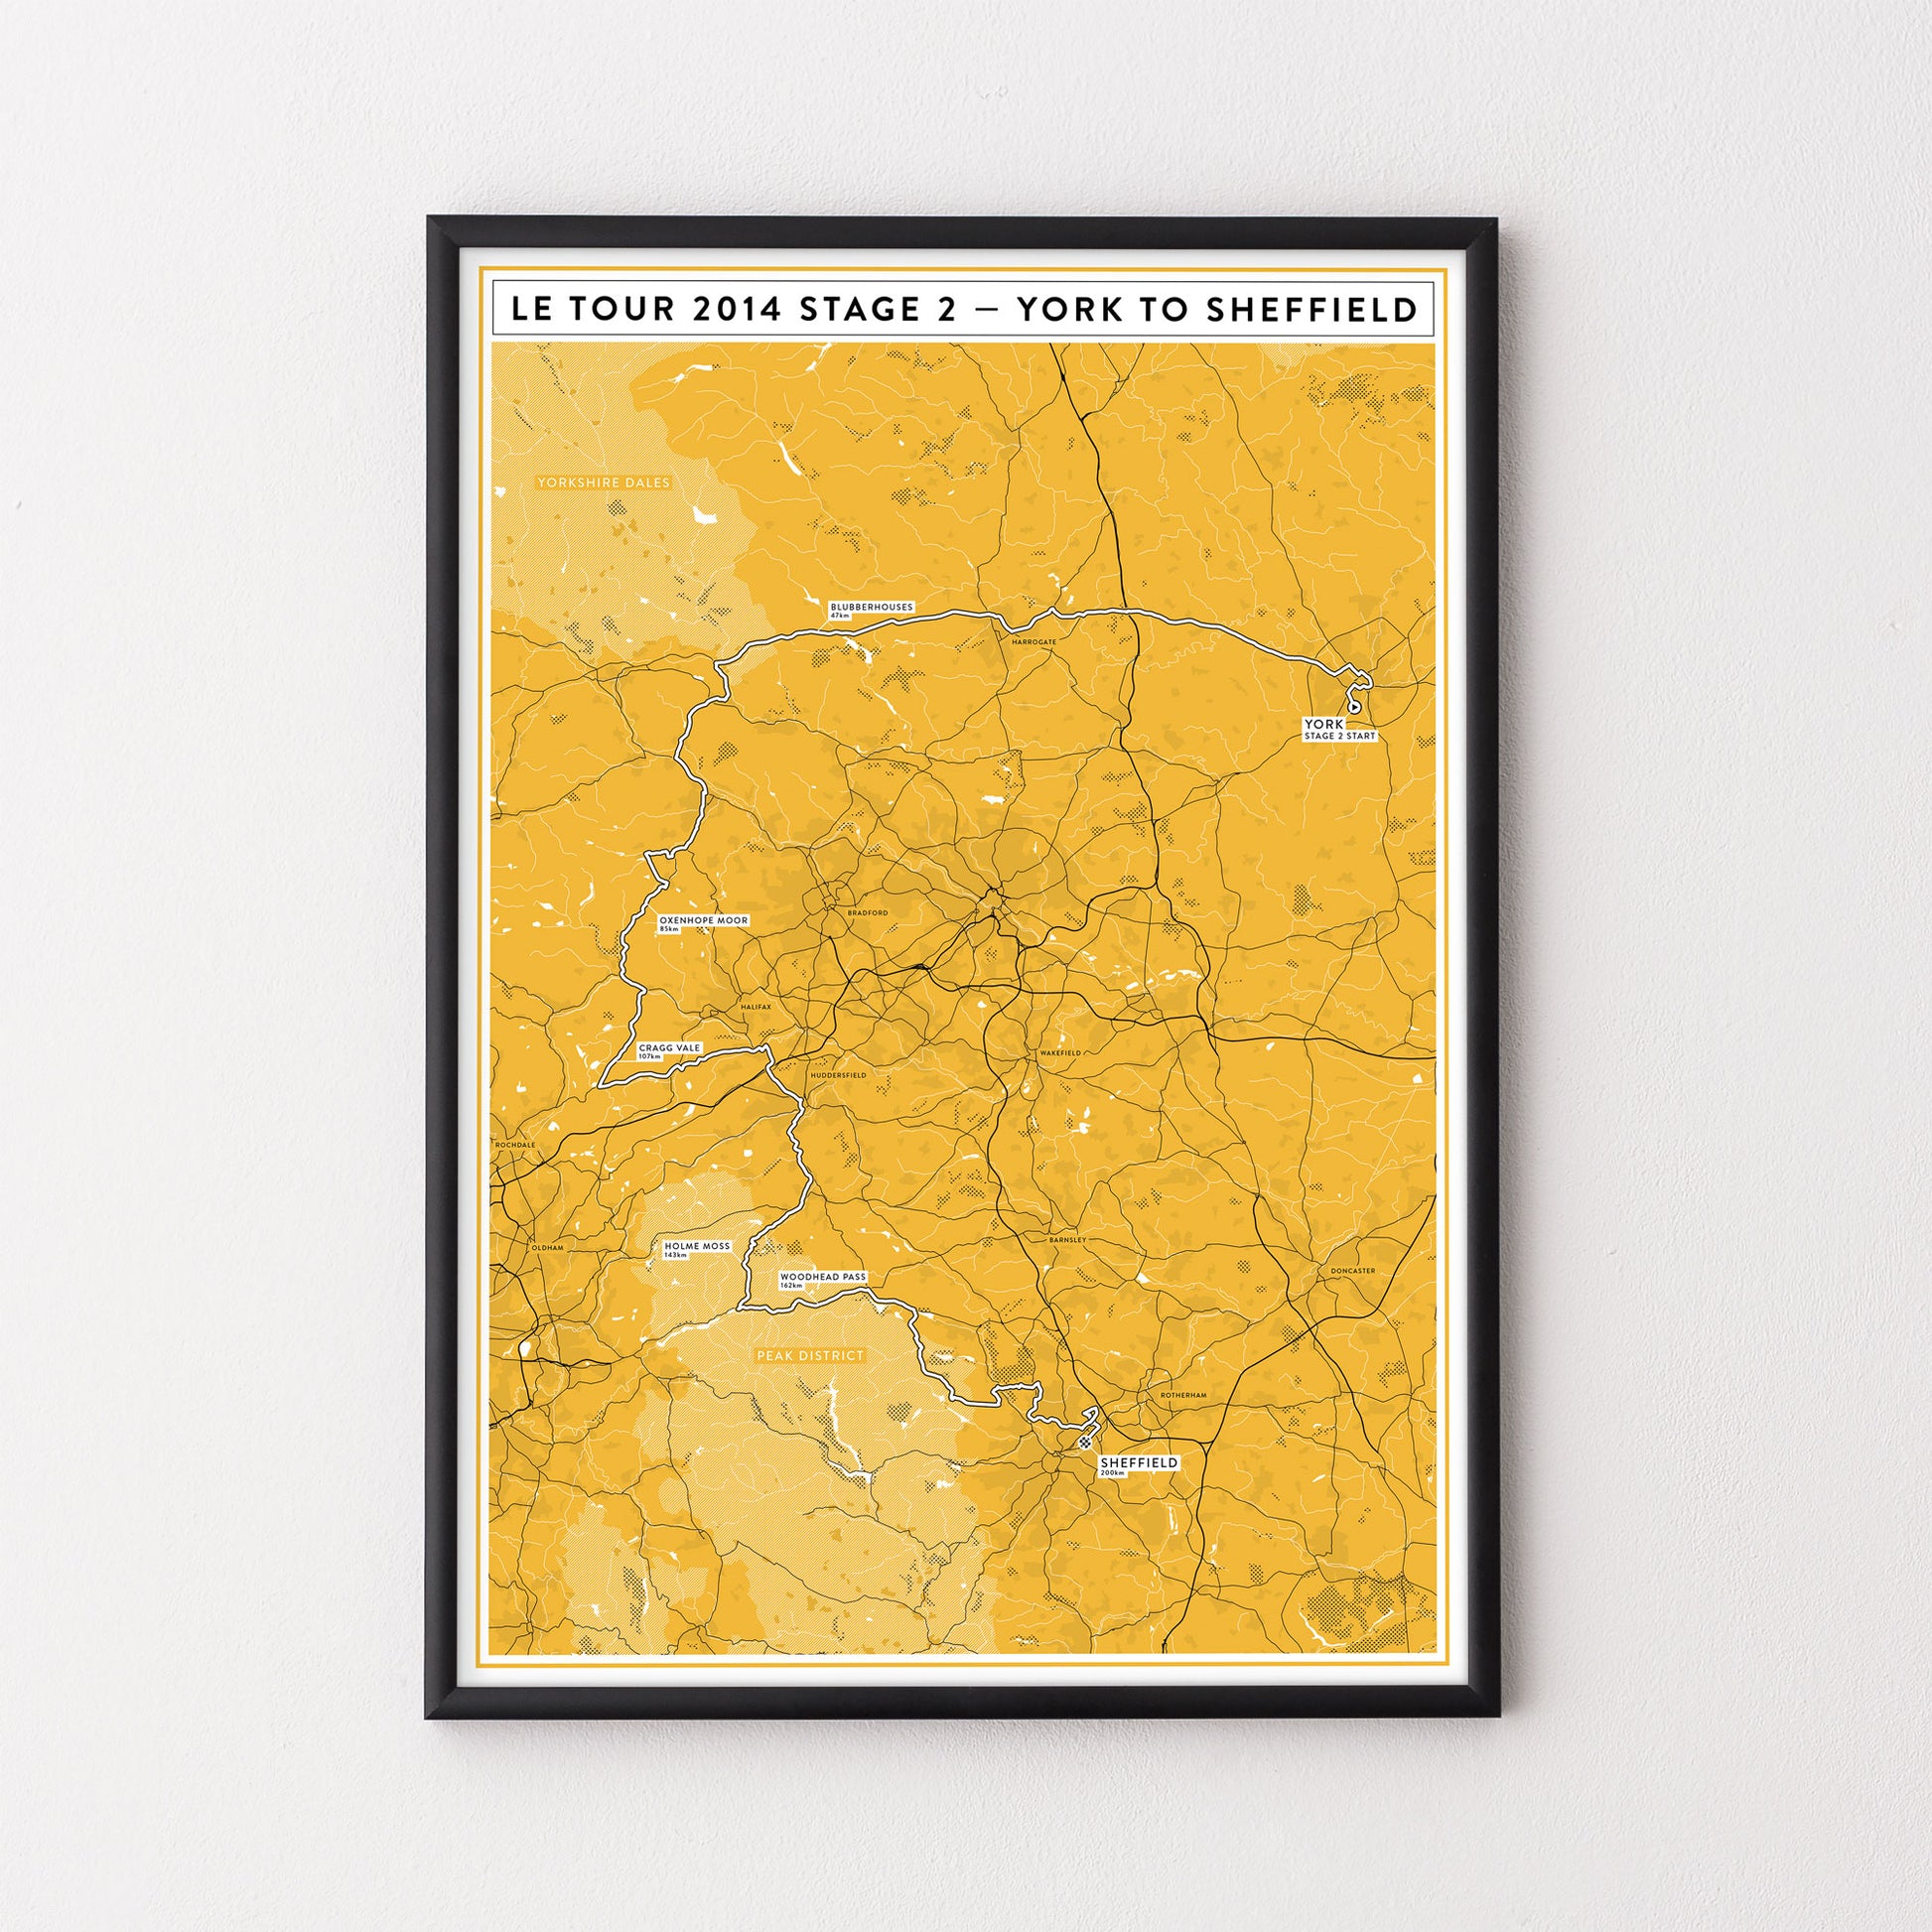 Tour de France 2014 Stage 2 Map Yorkshire – Poster – The English Cyclist